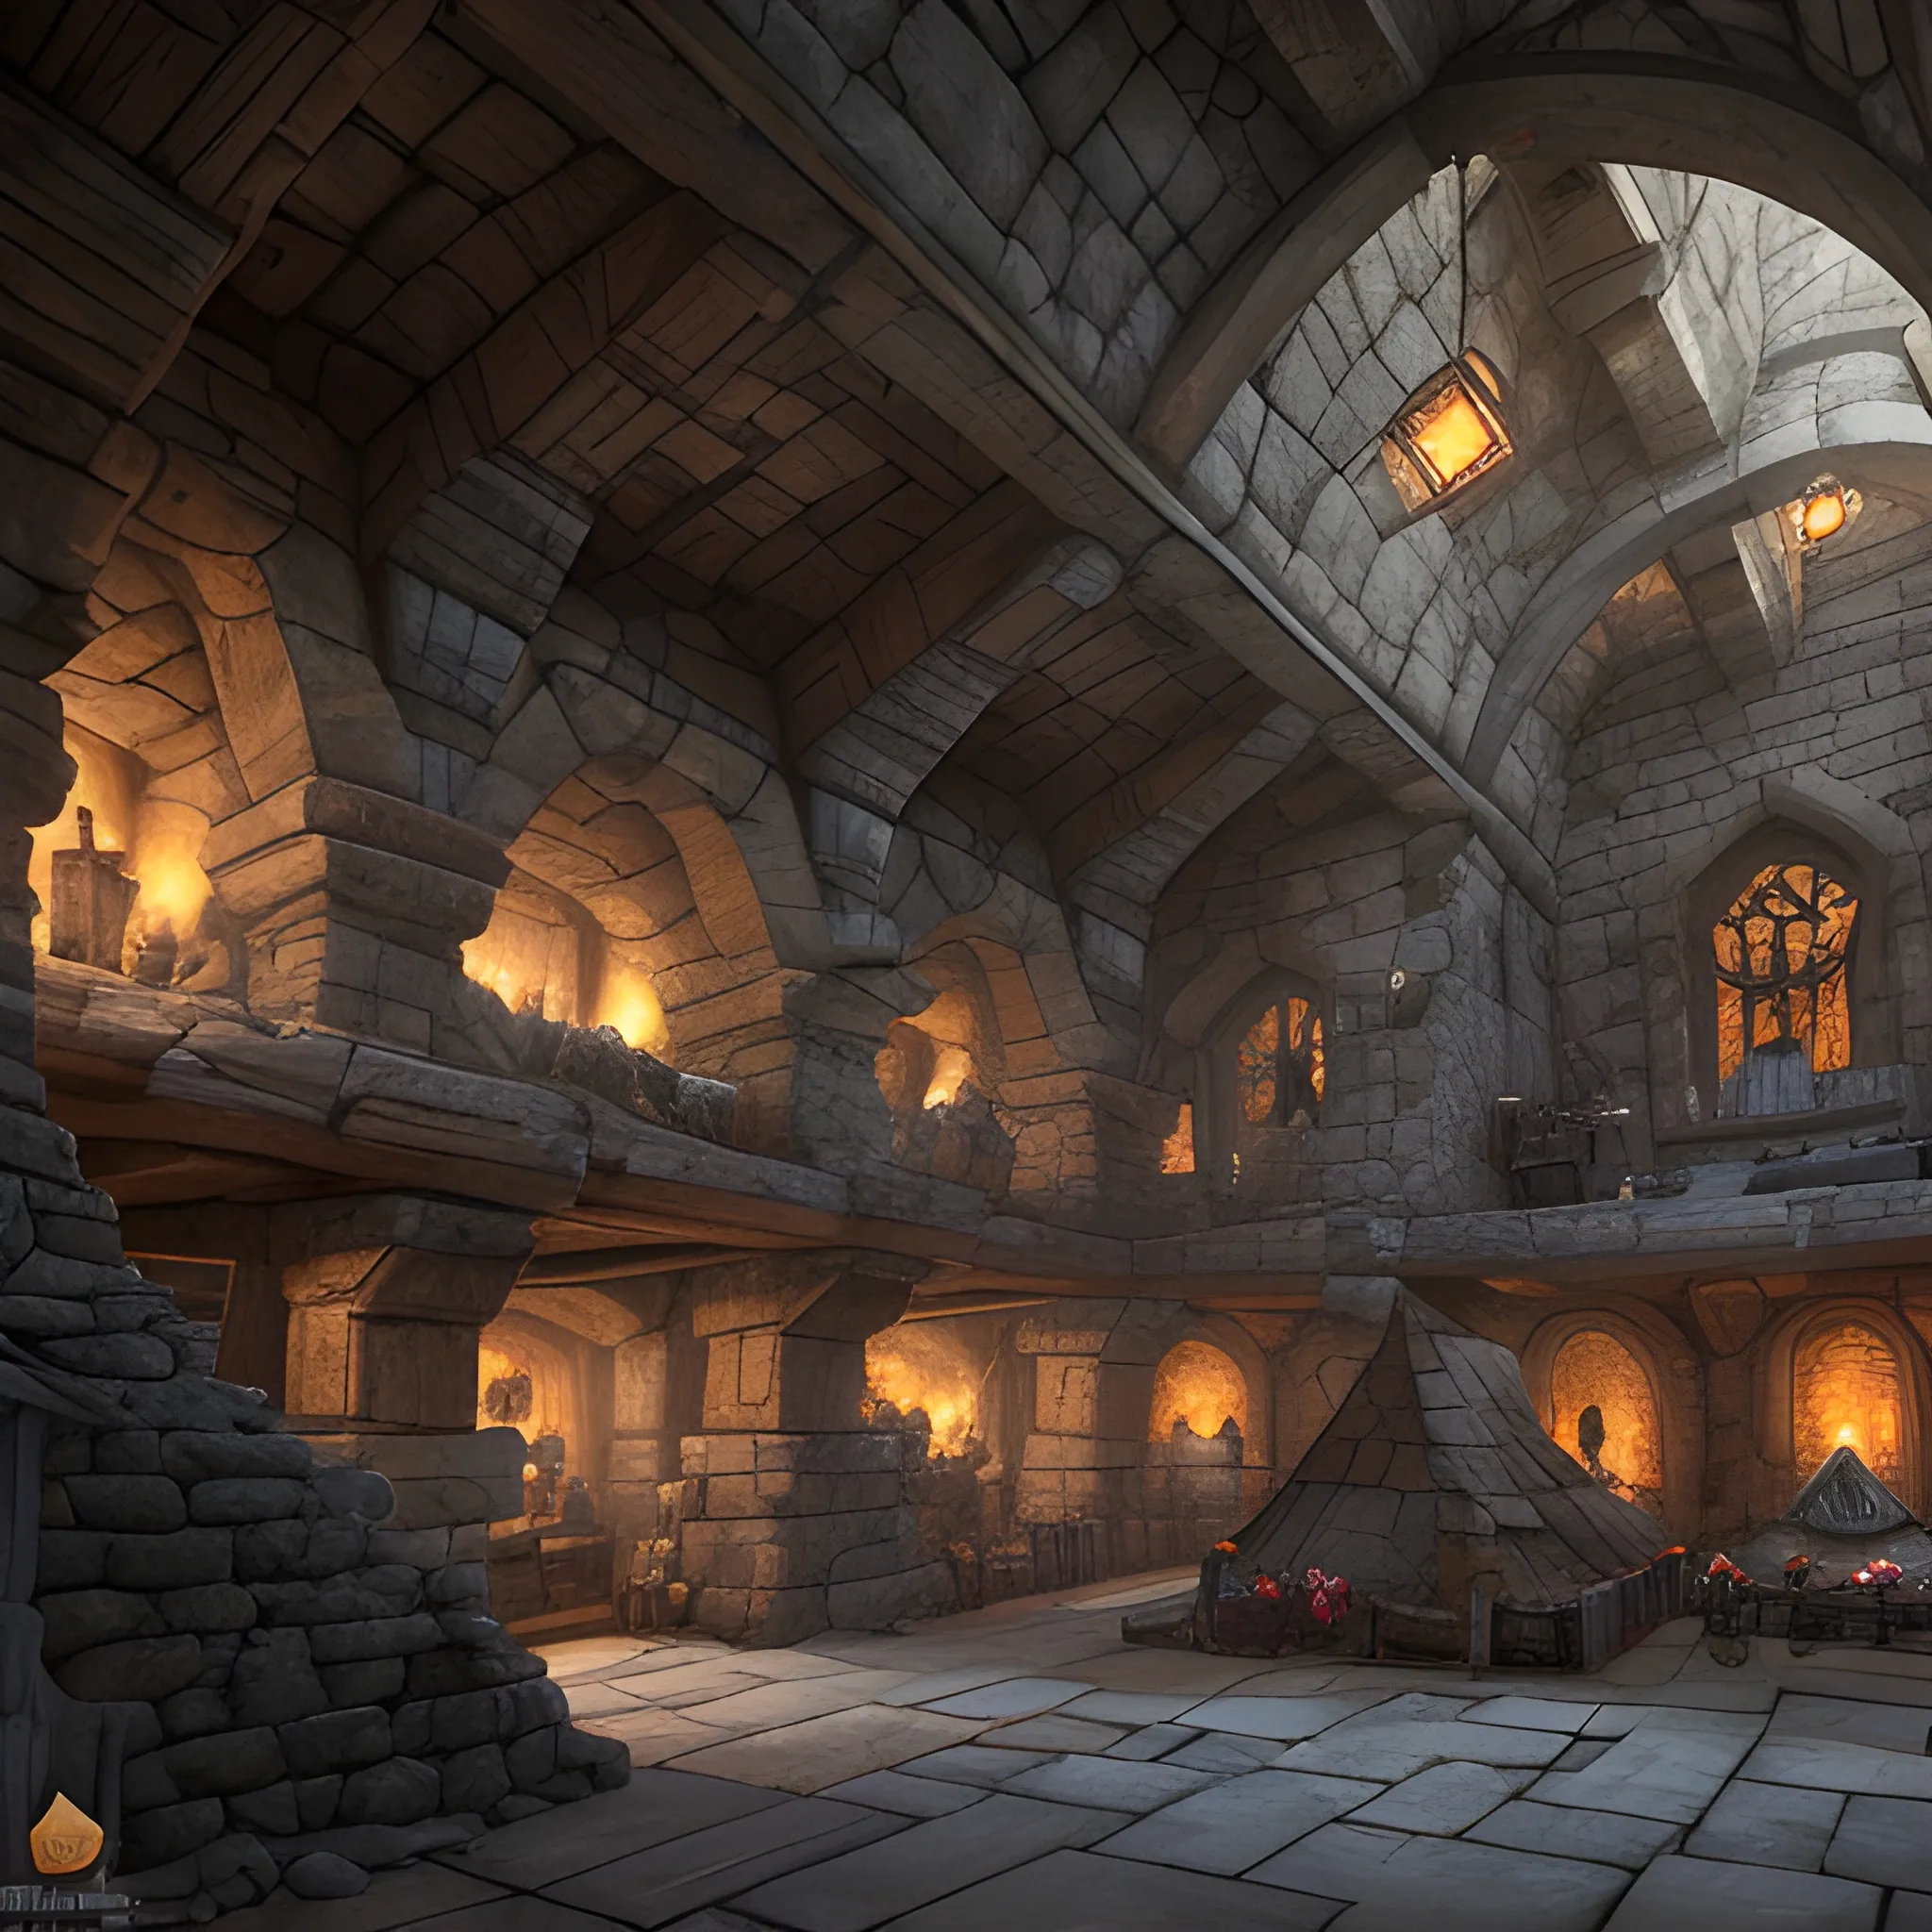 Underground forge, medieval, dwarven forge, super spacious, tall ceiling, stone floor and walls, many tents, anvils, shopping district, dark, many people, selling posts, view from inside, weapons and armors, high resolution, detailed, 8k, detailed matte painting, fantastical, intricate detail, splash screen, complementary colors, fantasy concept art